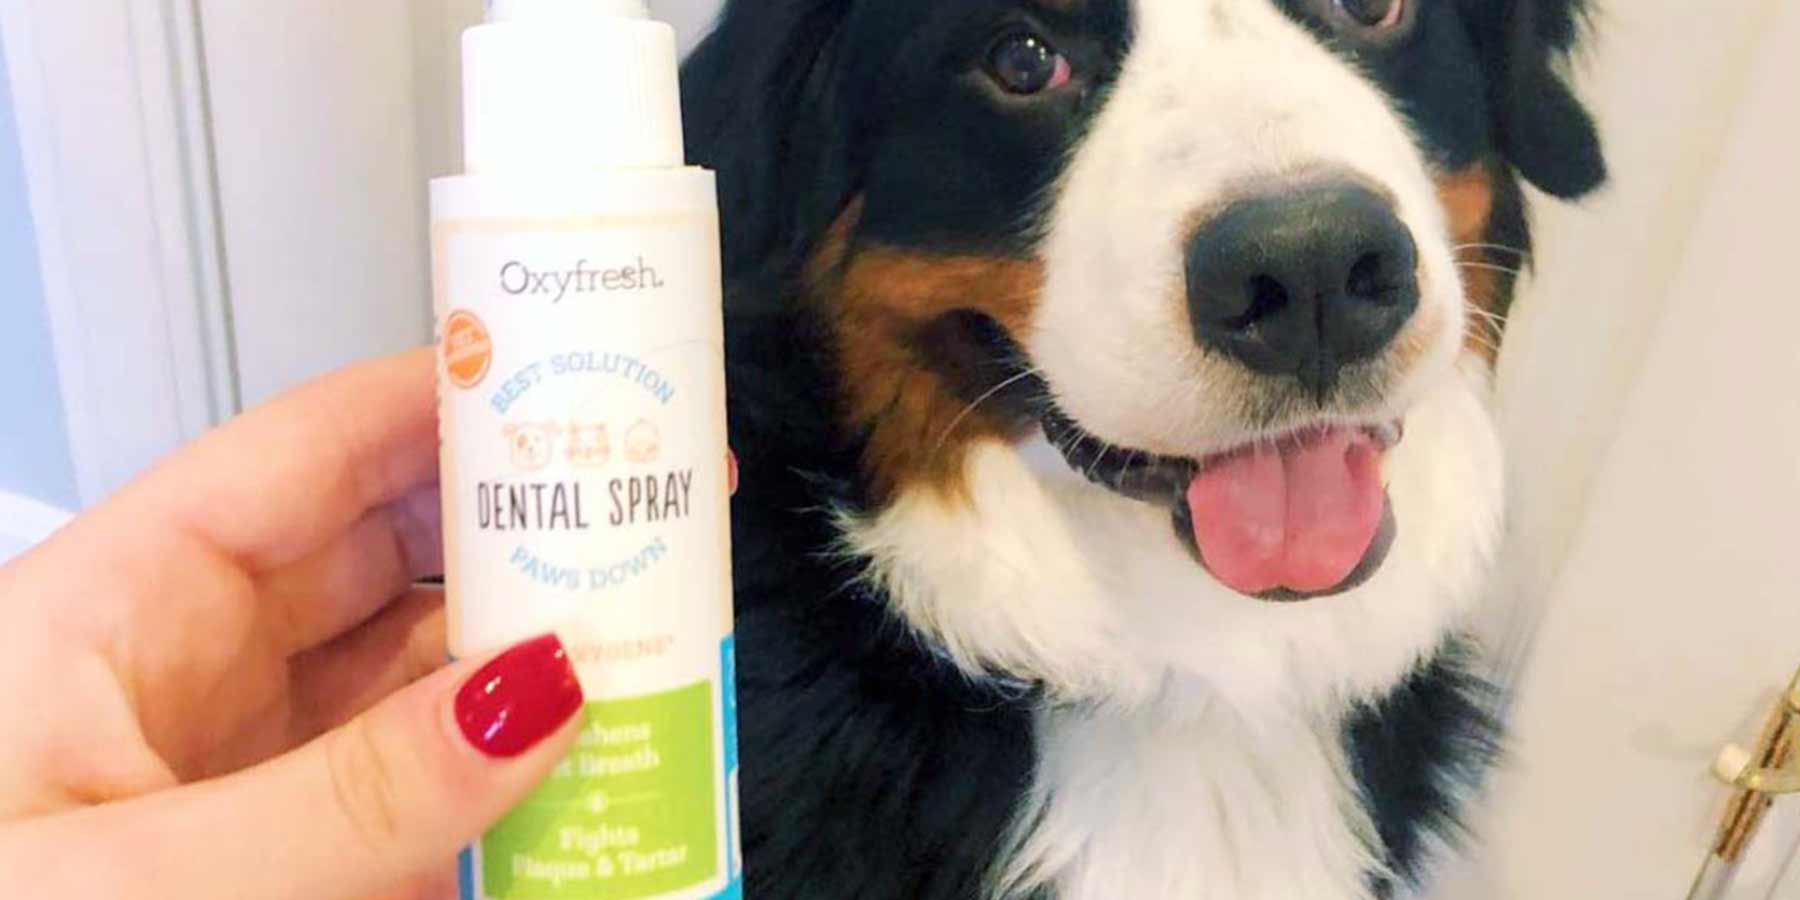 Social-Media-Post-From-Instagram-User-_raylantheberner-holding-a-bottle-of-oxyfresh-pet-dental-teeth-and-breath-spray-next-to-their-smiling-dog